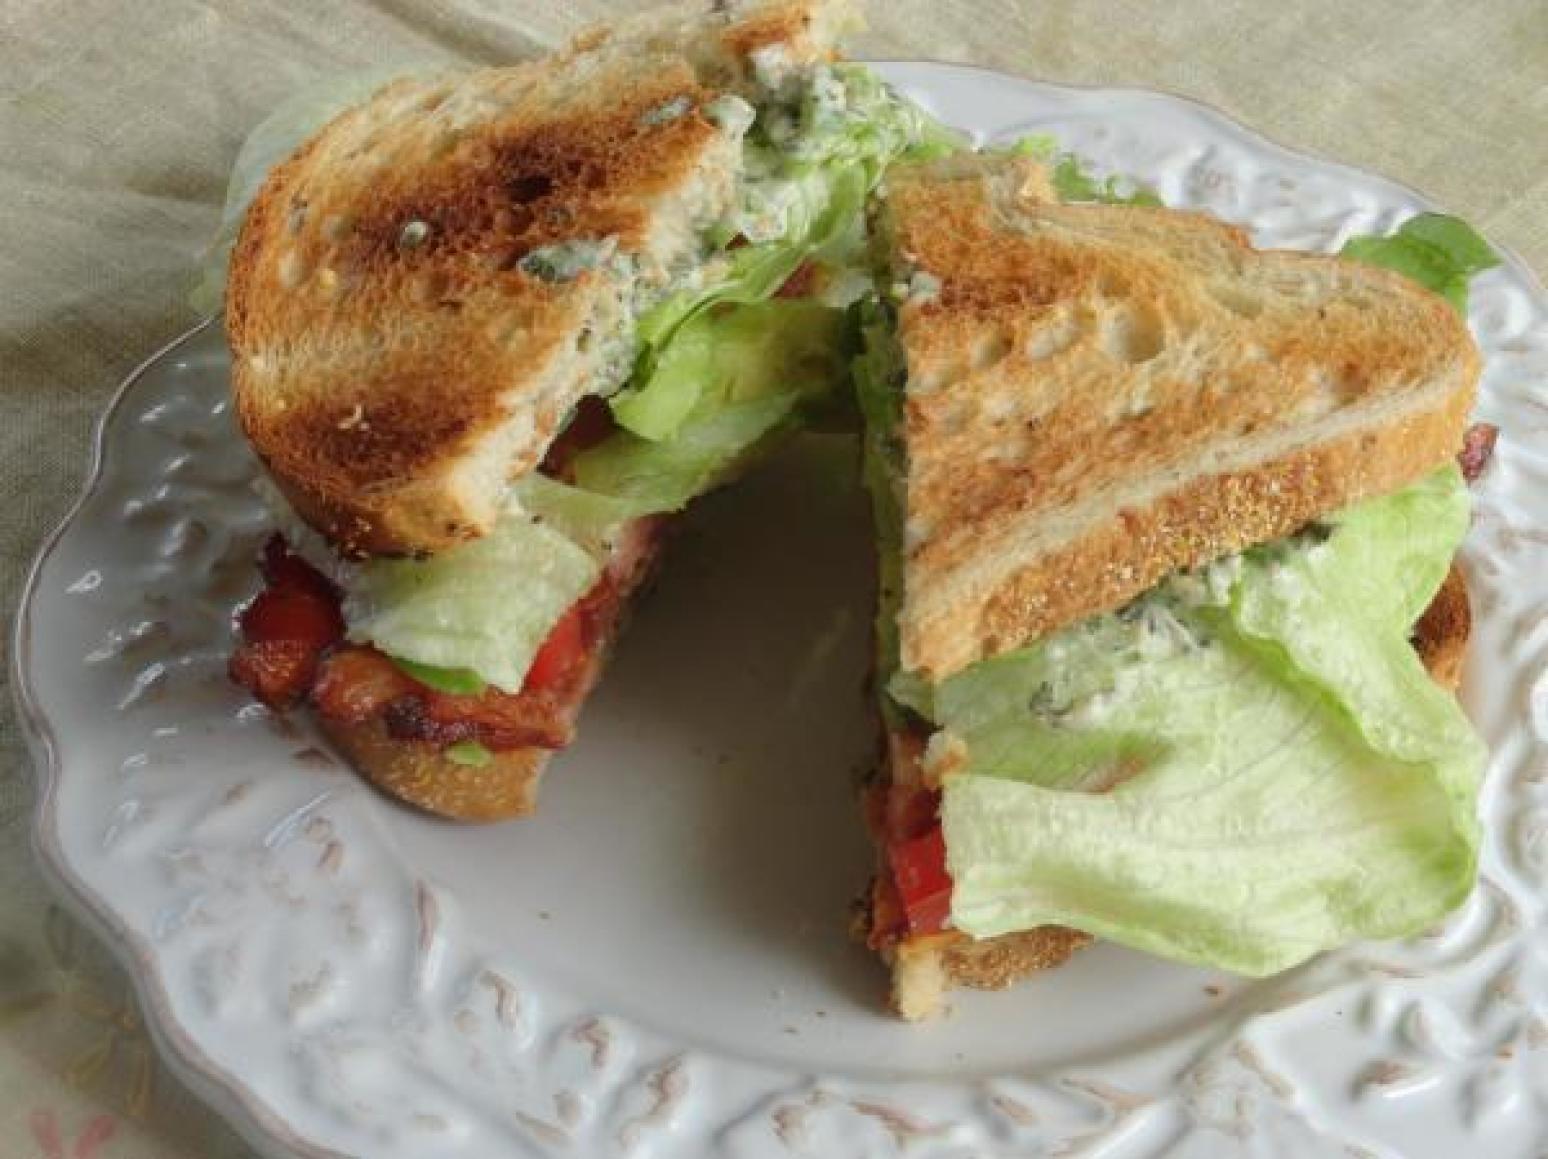 BLT with Avocado & Spicy Sauce